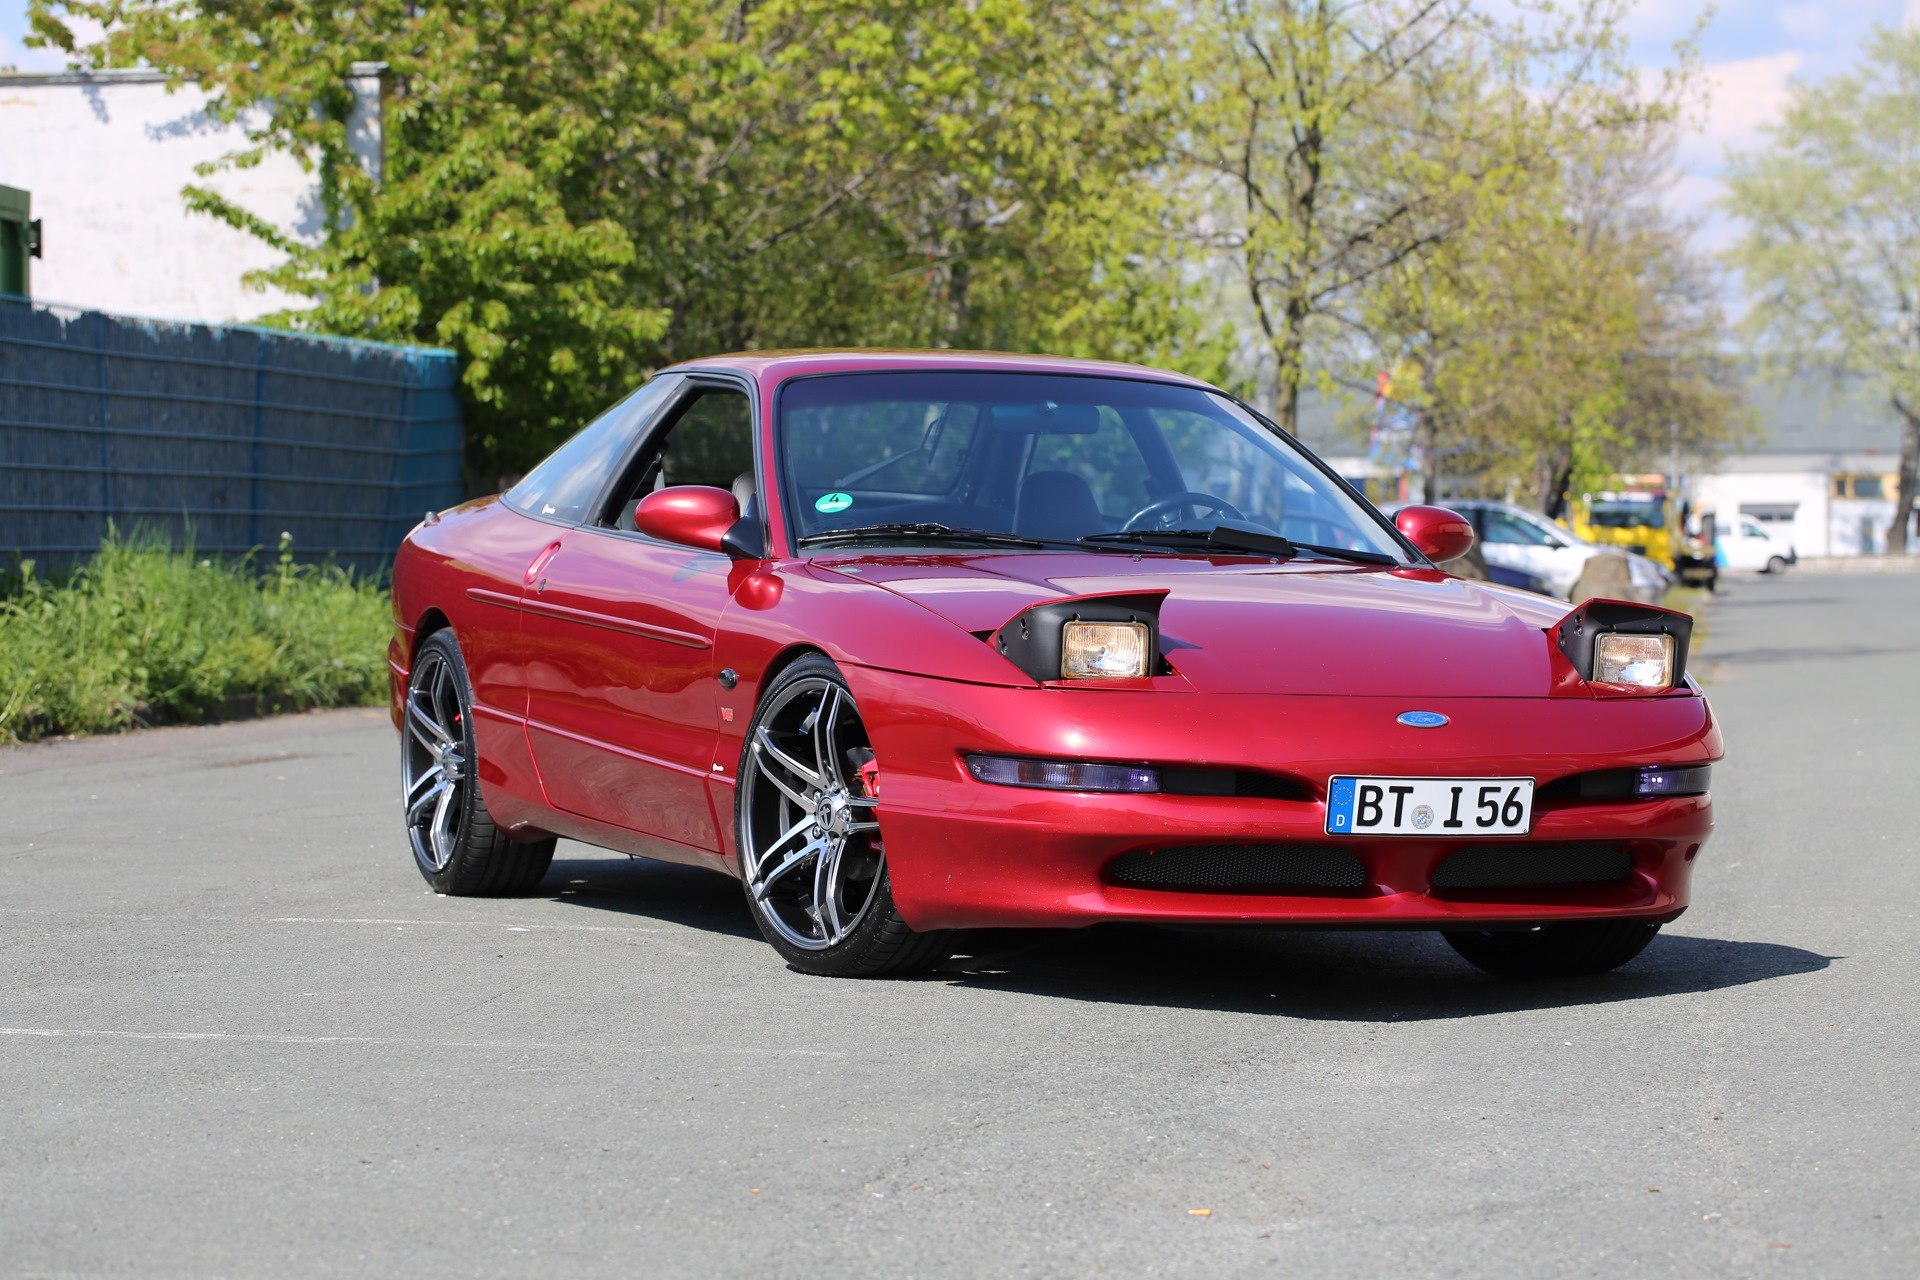 Прода 20. Ford Probe 2. Ford Probe 2 gt. Ford Probe 2.2. Ford Probe gt 2.2.